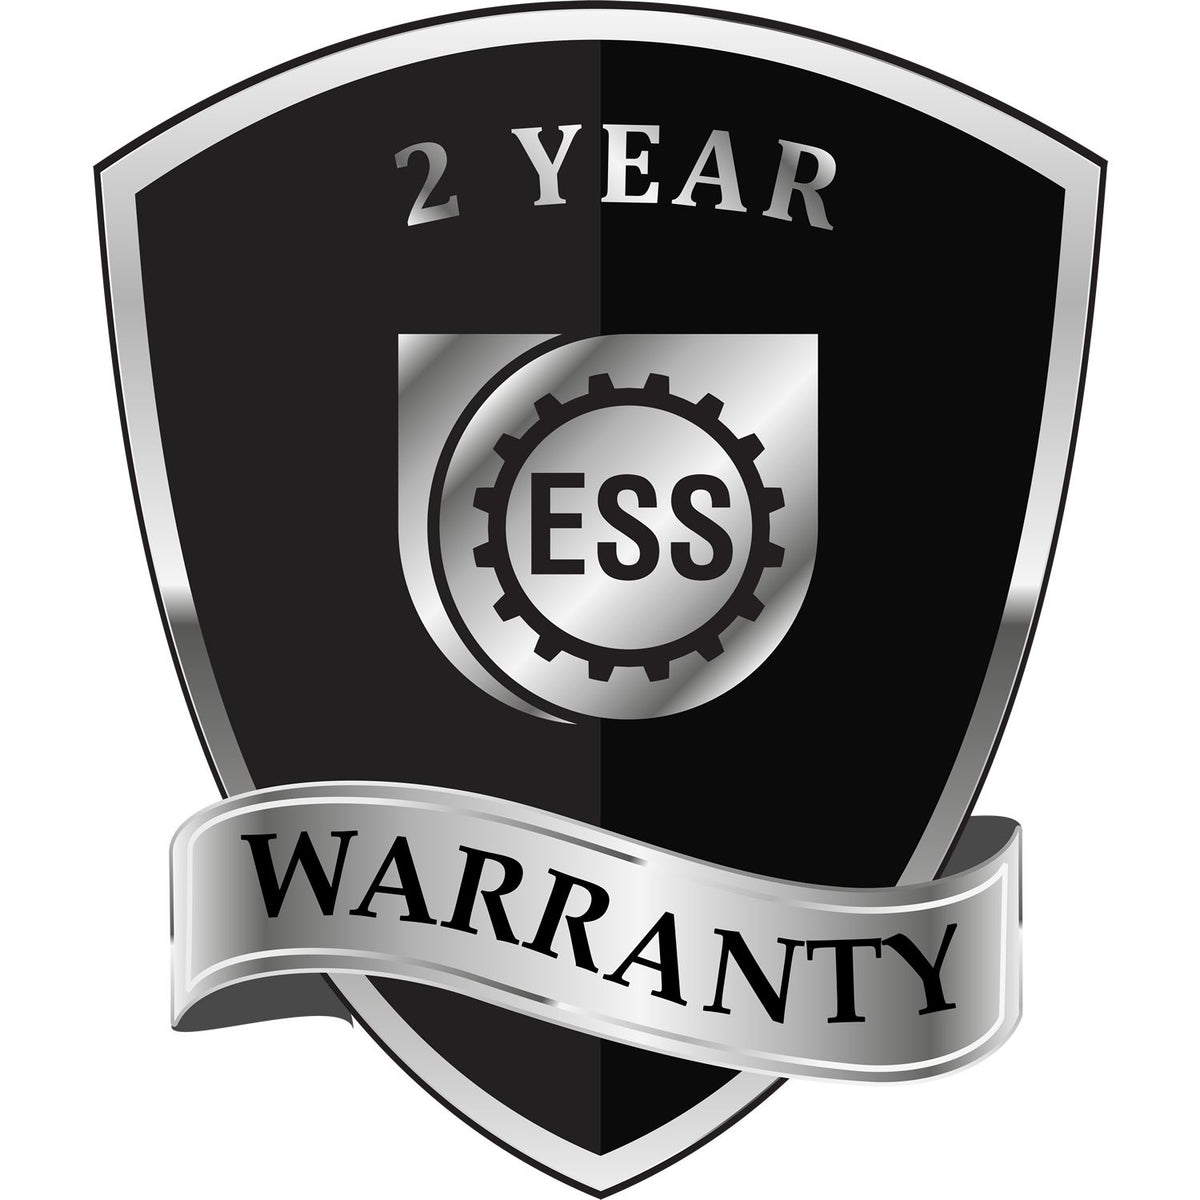 A black and silver badge or emblem showing warranty information for the Gift West Virginia Engineer Seal